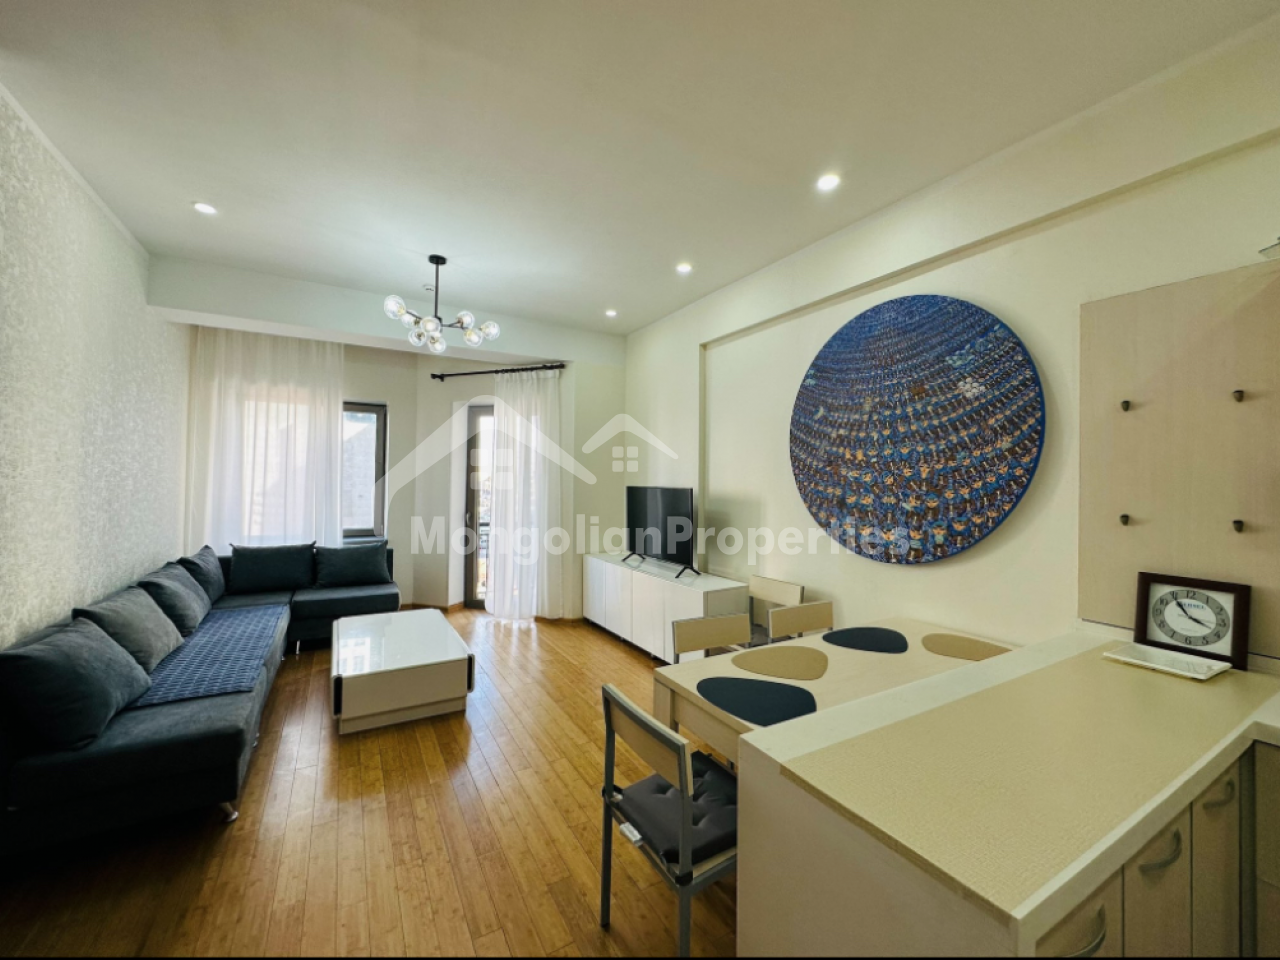 Cozy, Newly Renovated 2 bedroom apartment is for rent at the Regency Residence